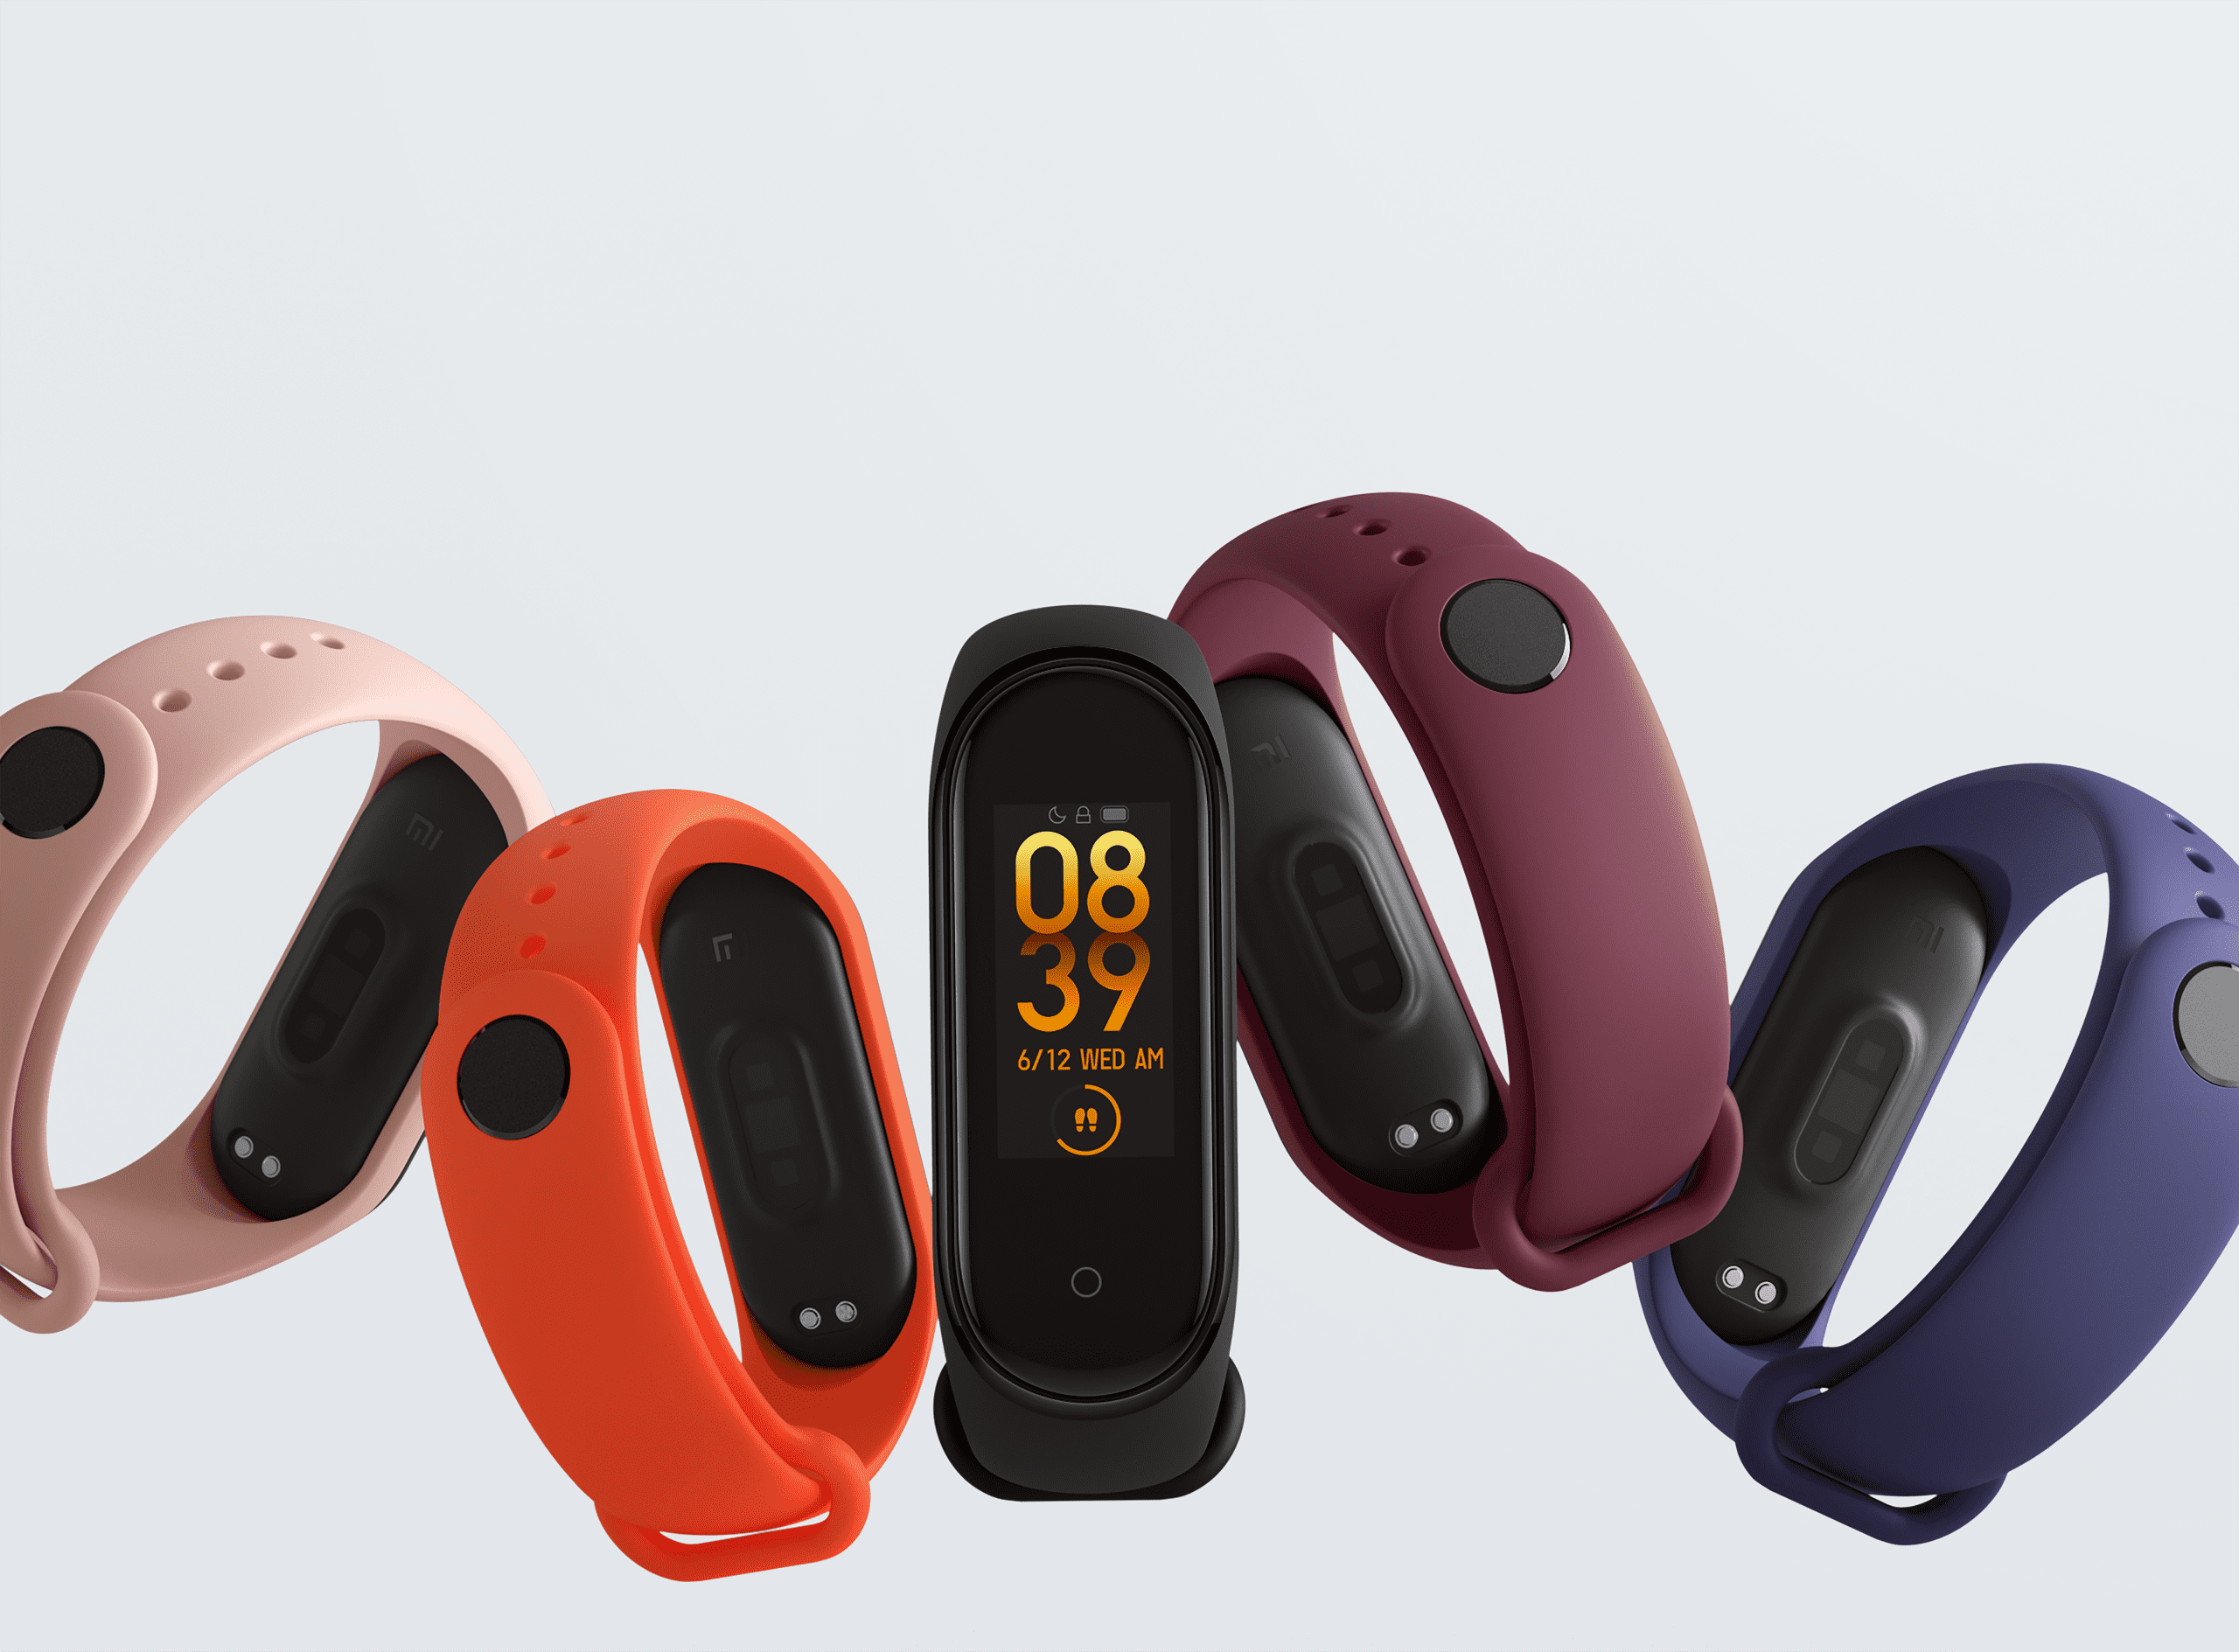 Xiaomi Mi Band 4 is updated with the ability to change the screen